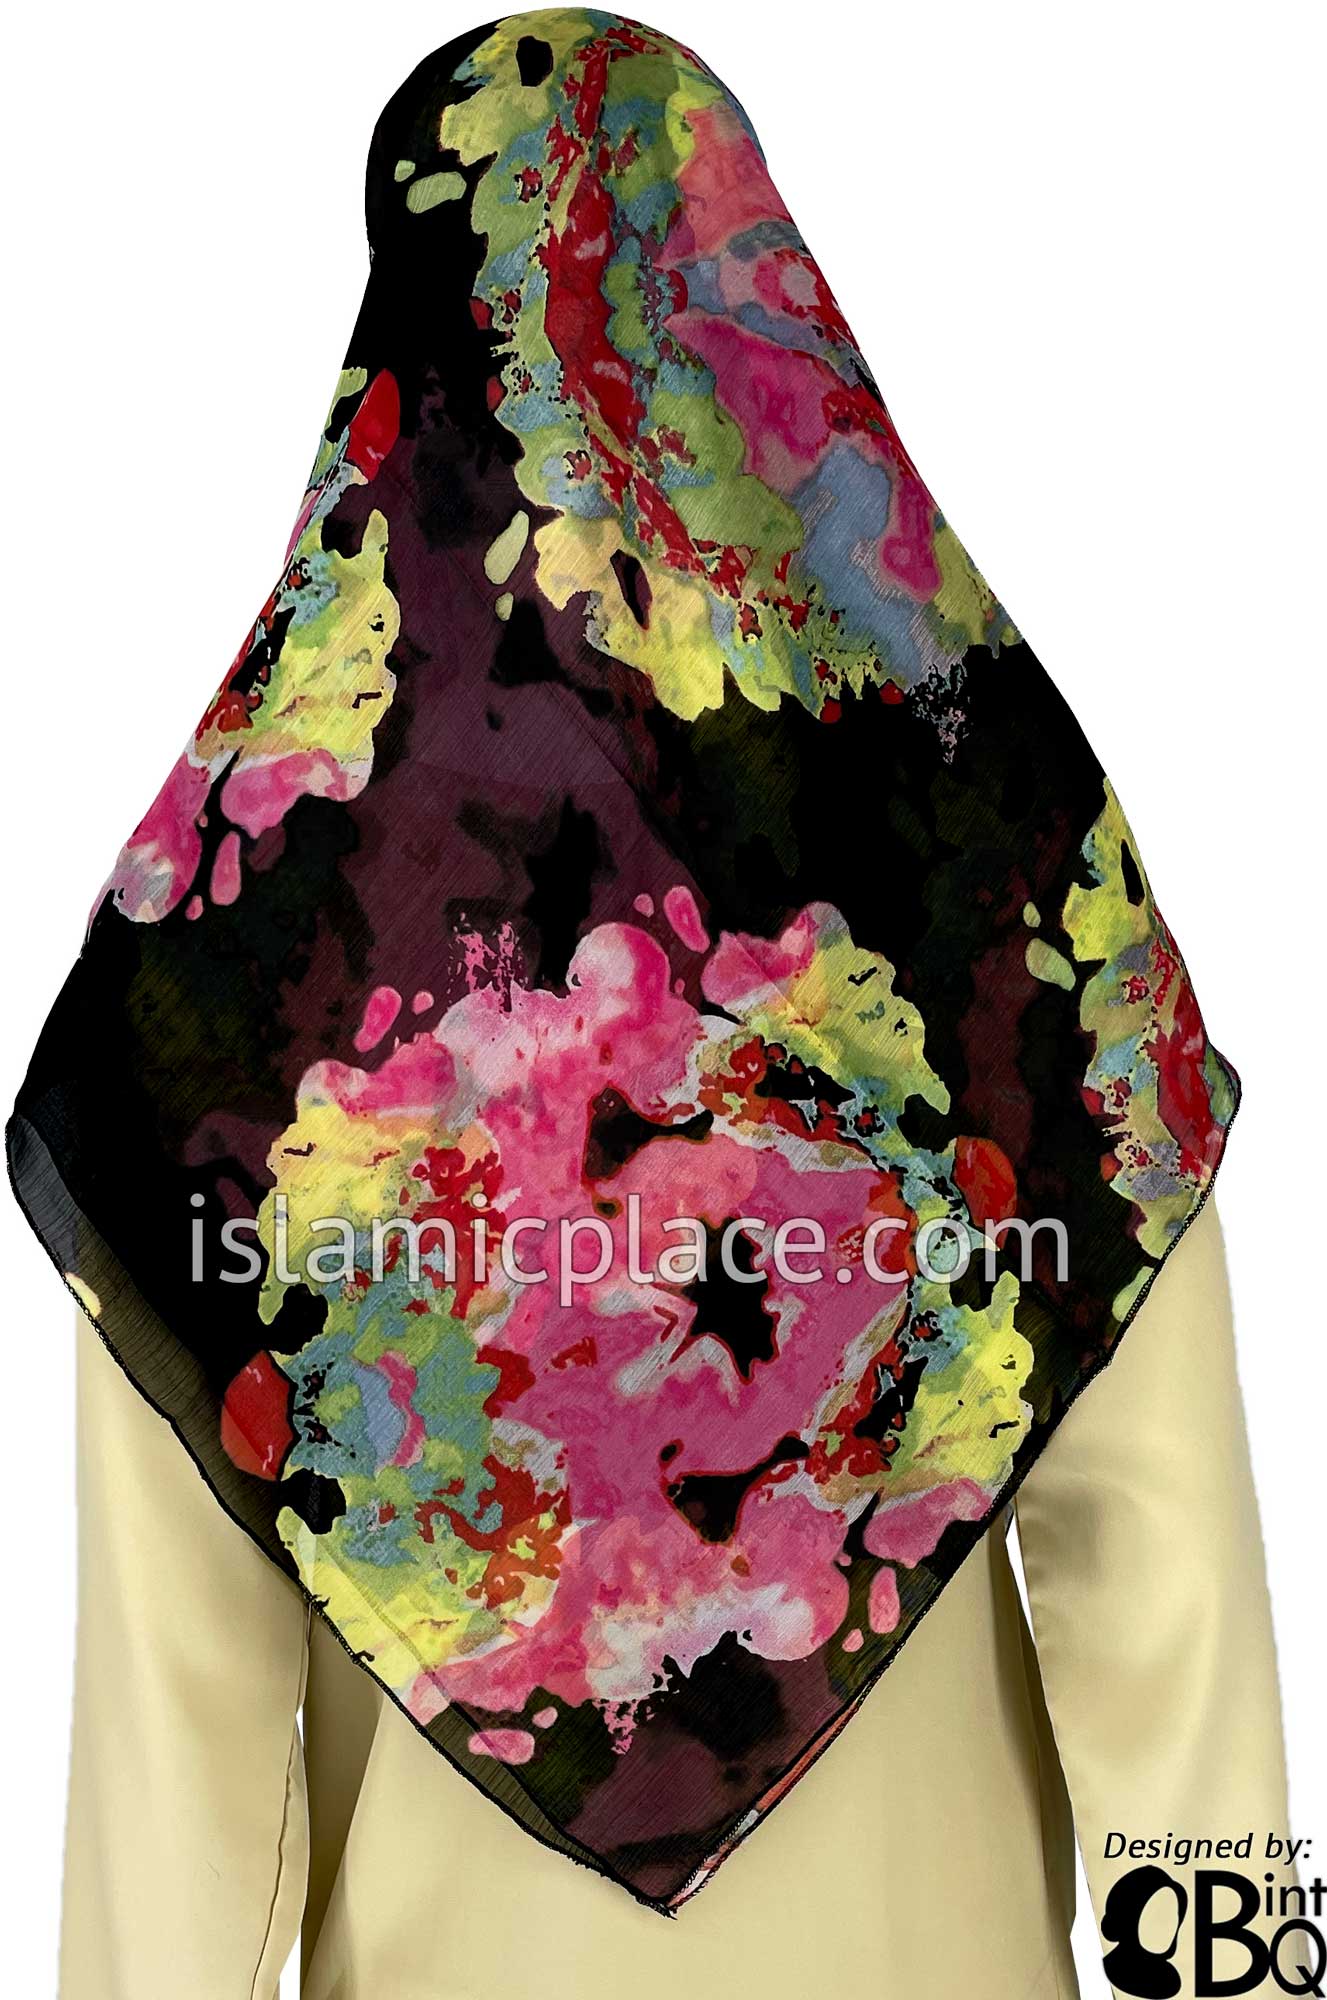 Pink and Yellow Smudged Tie-Dye Design on Black - 45" Square Printed Khimar